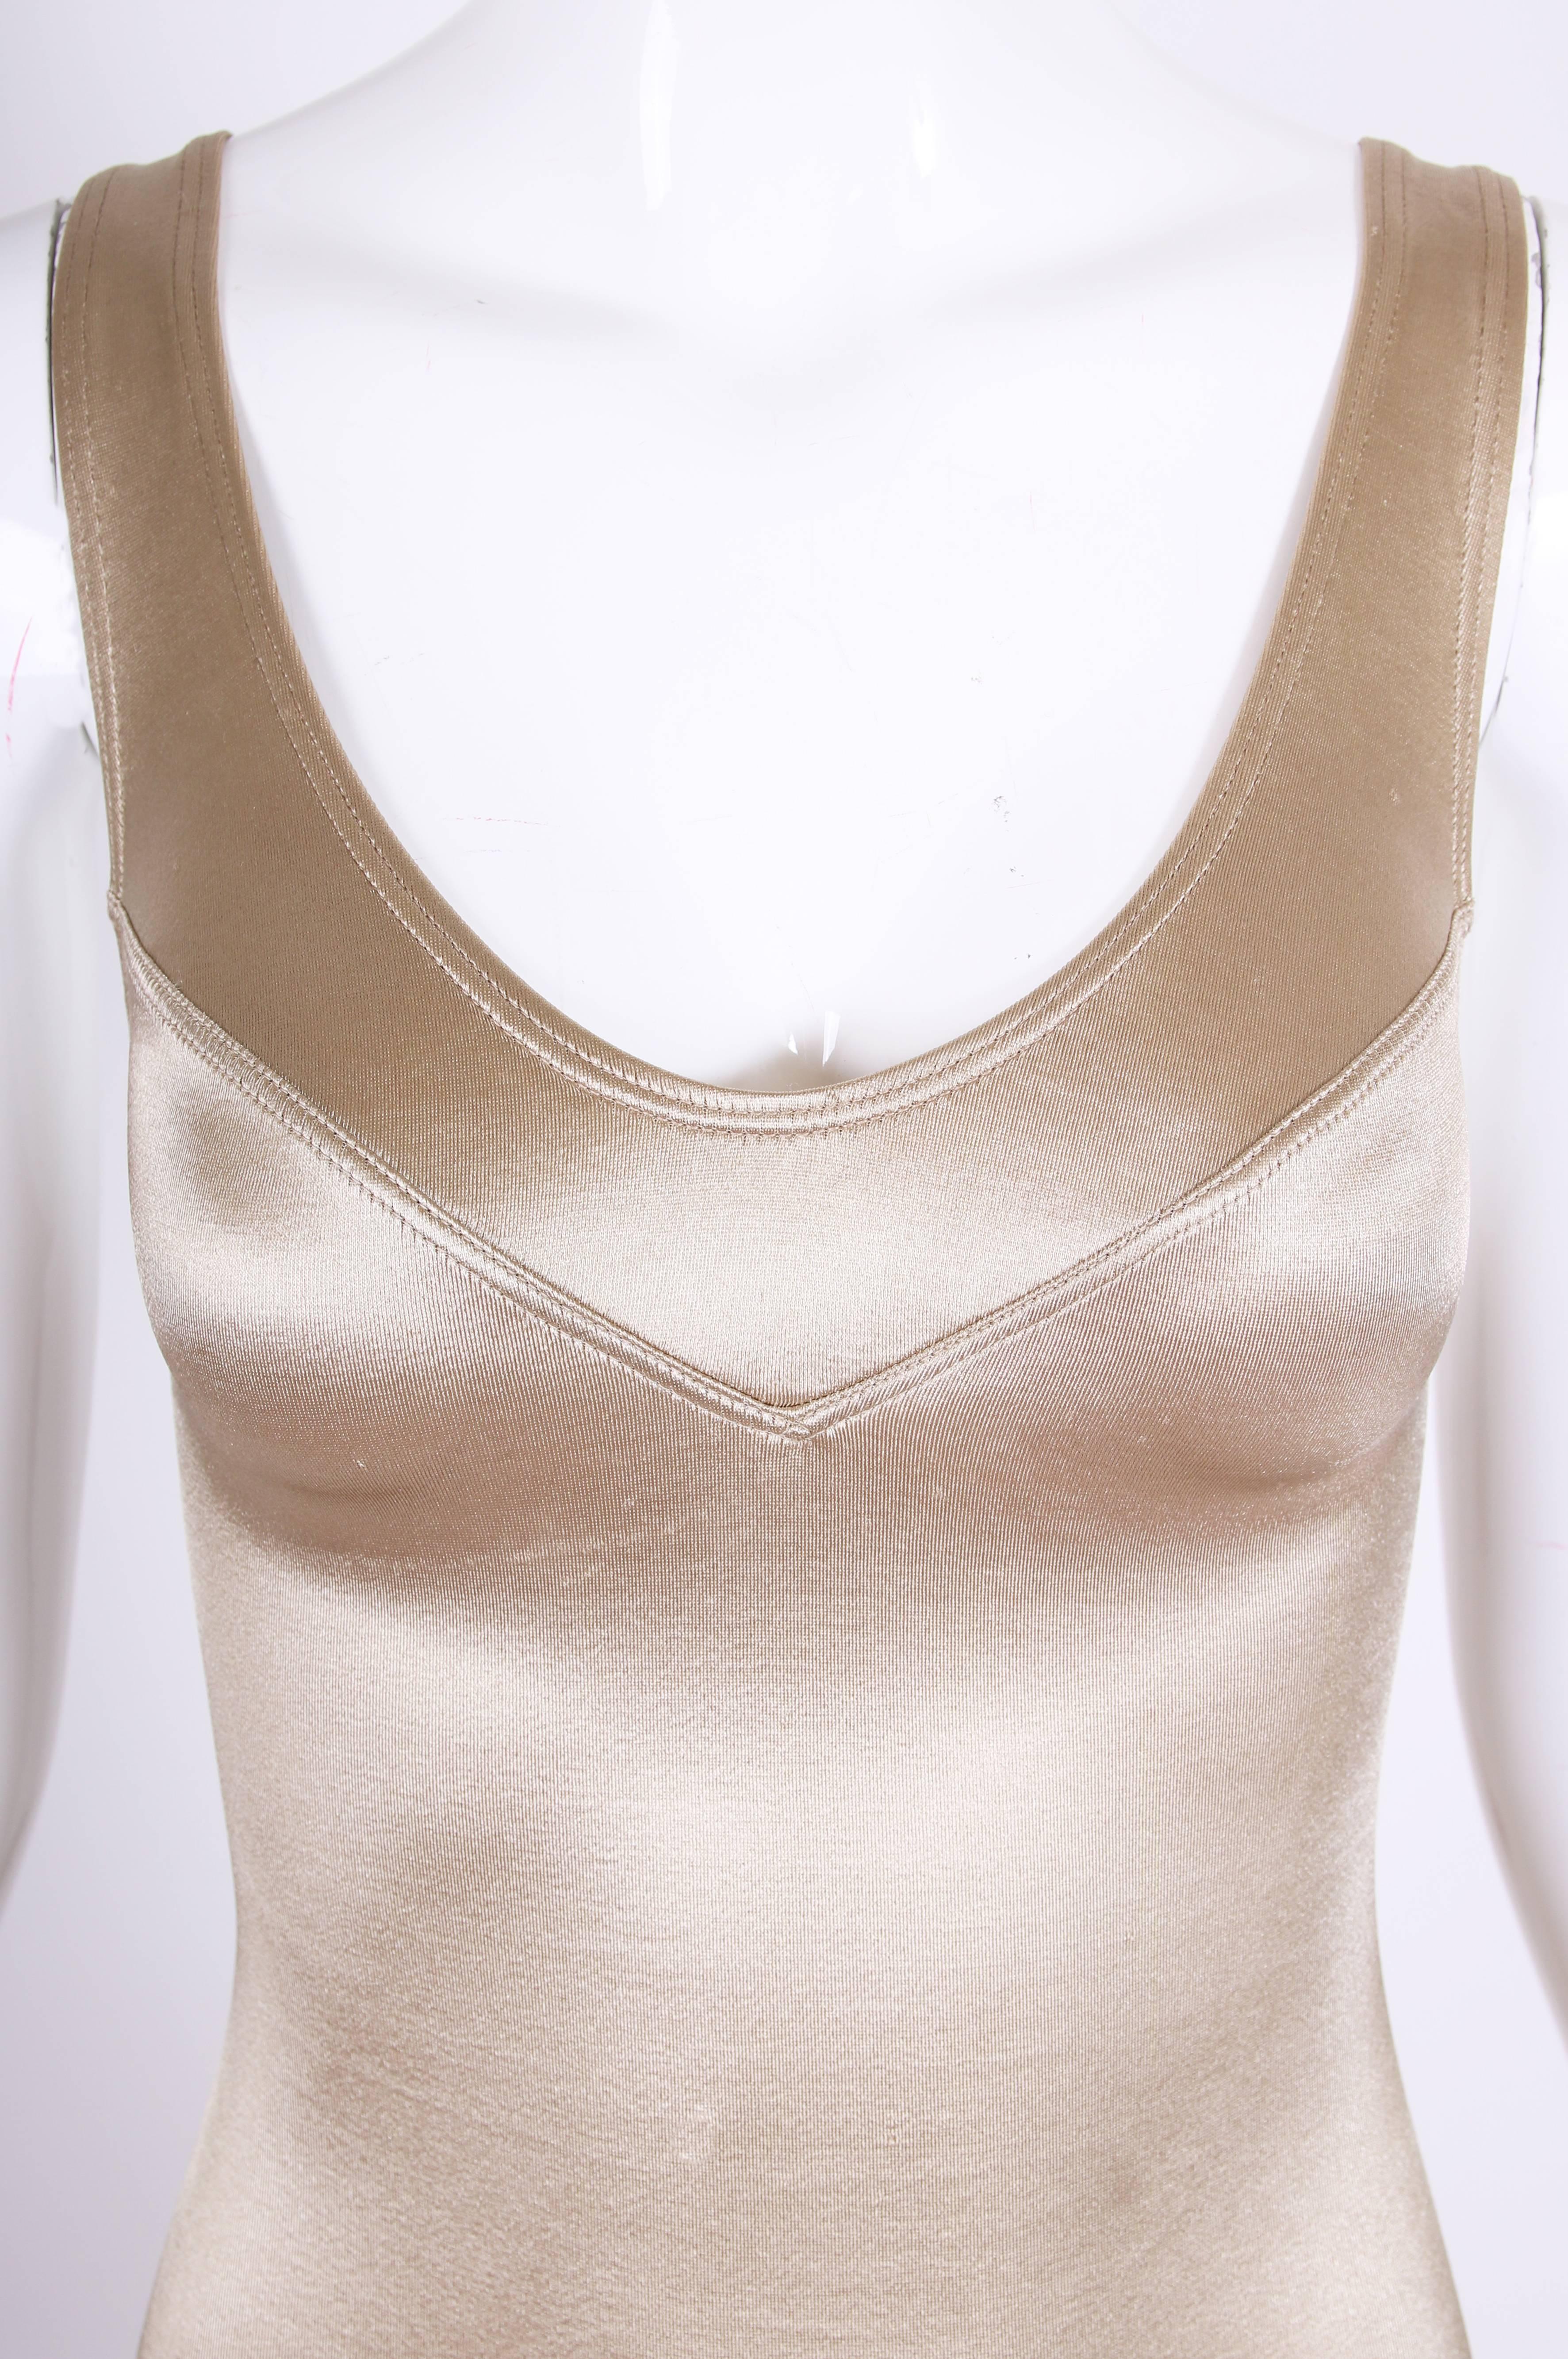 Beige Azzedine Alaia Vintage Champagne Colored Stretch Satin Bathing Suit